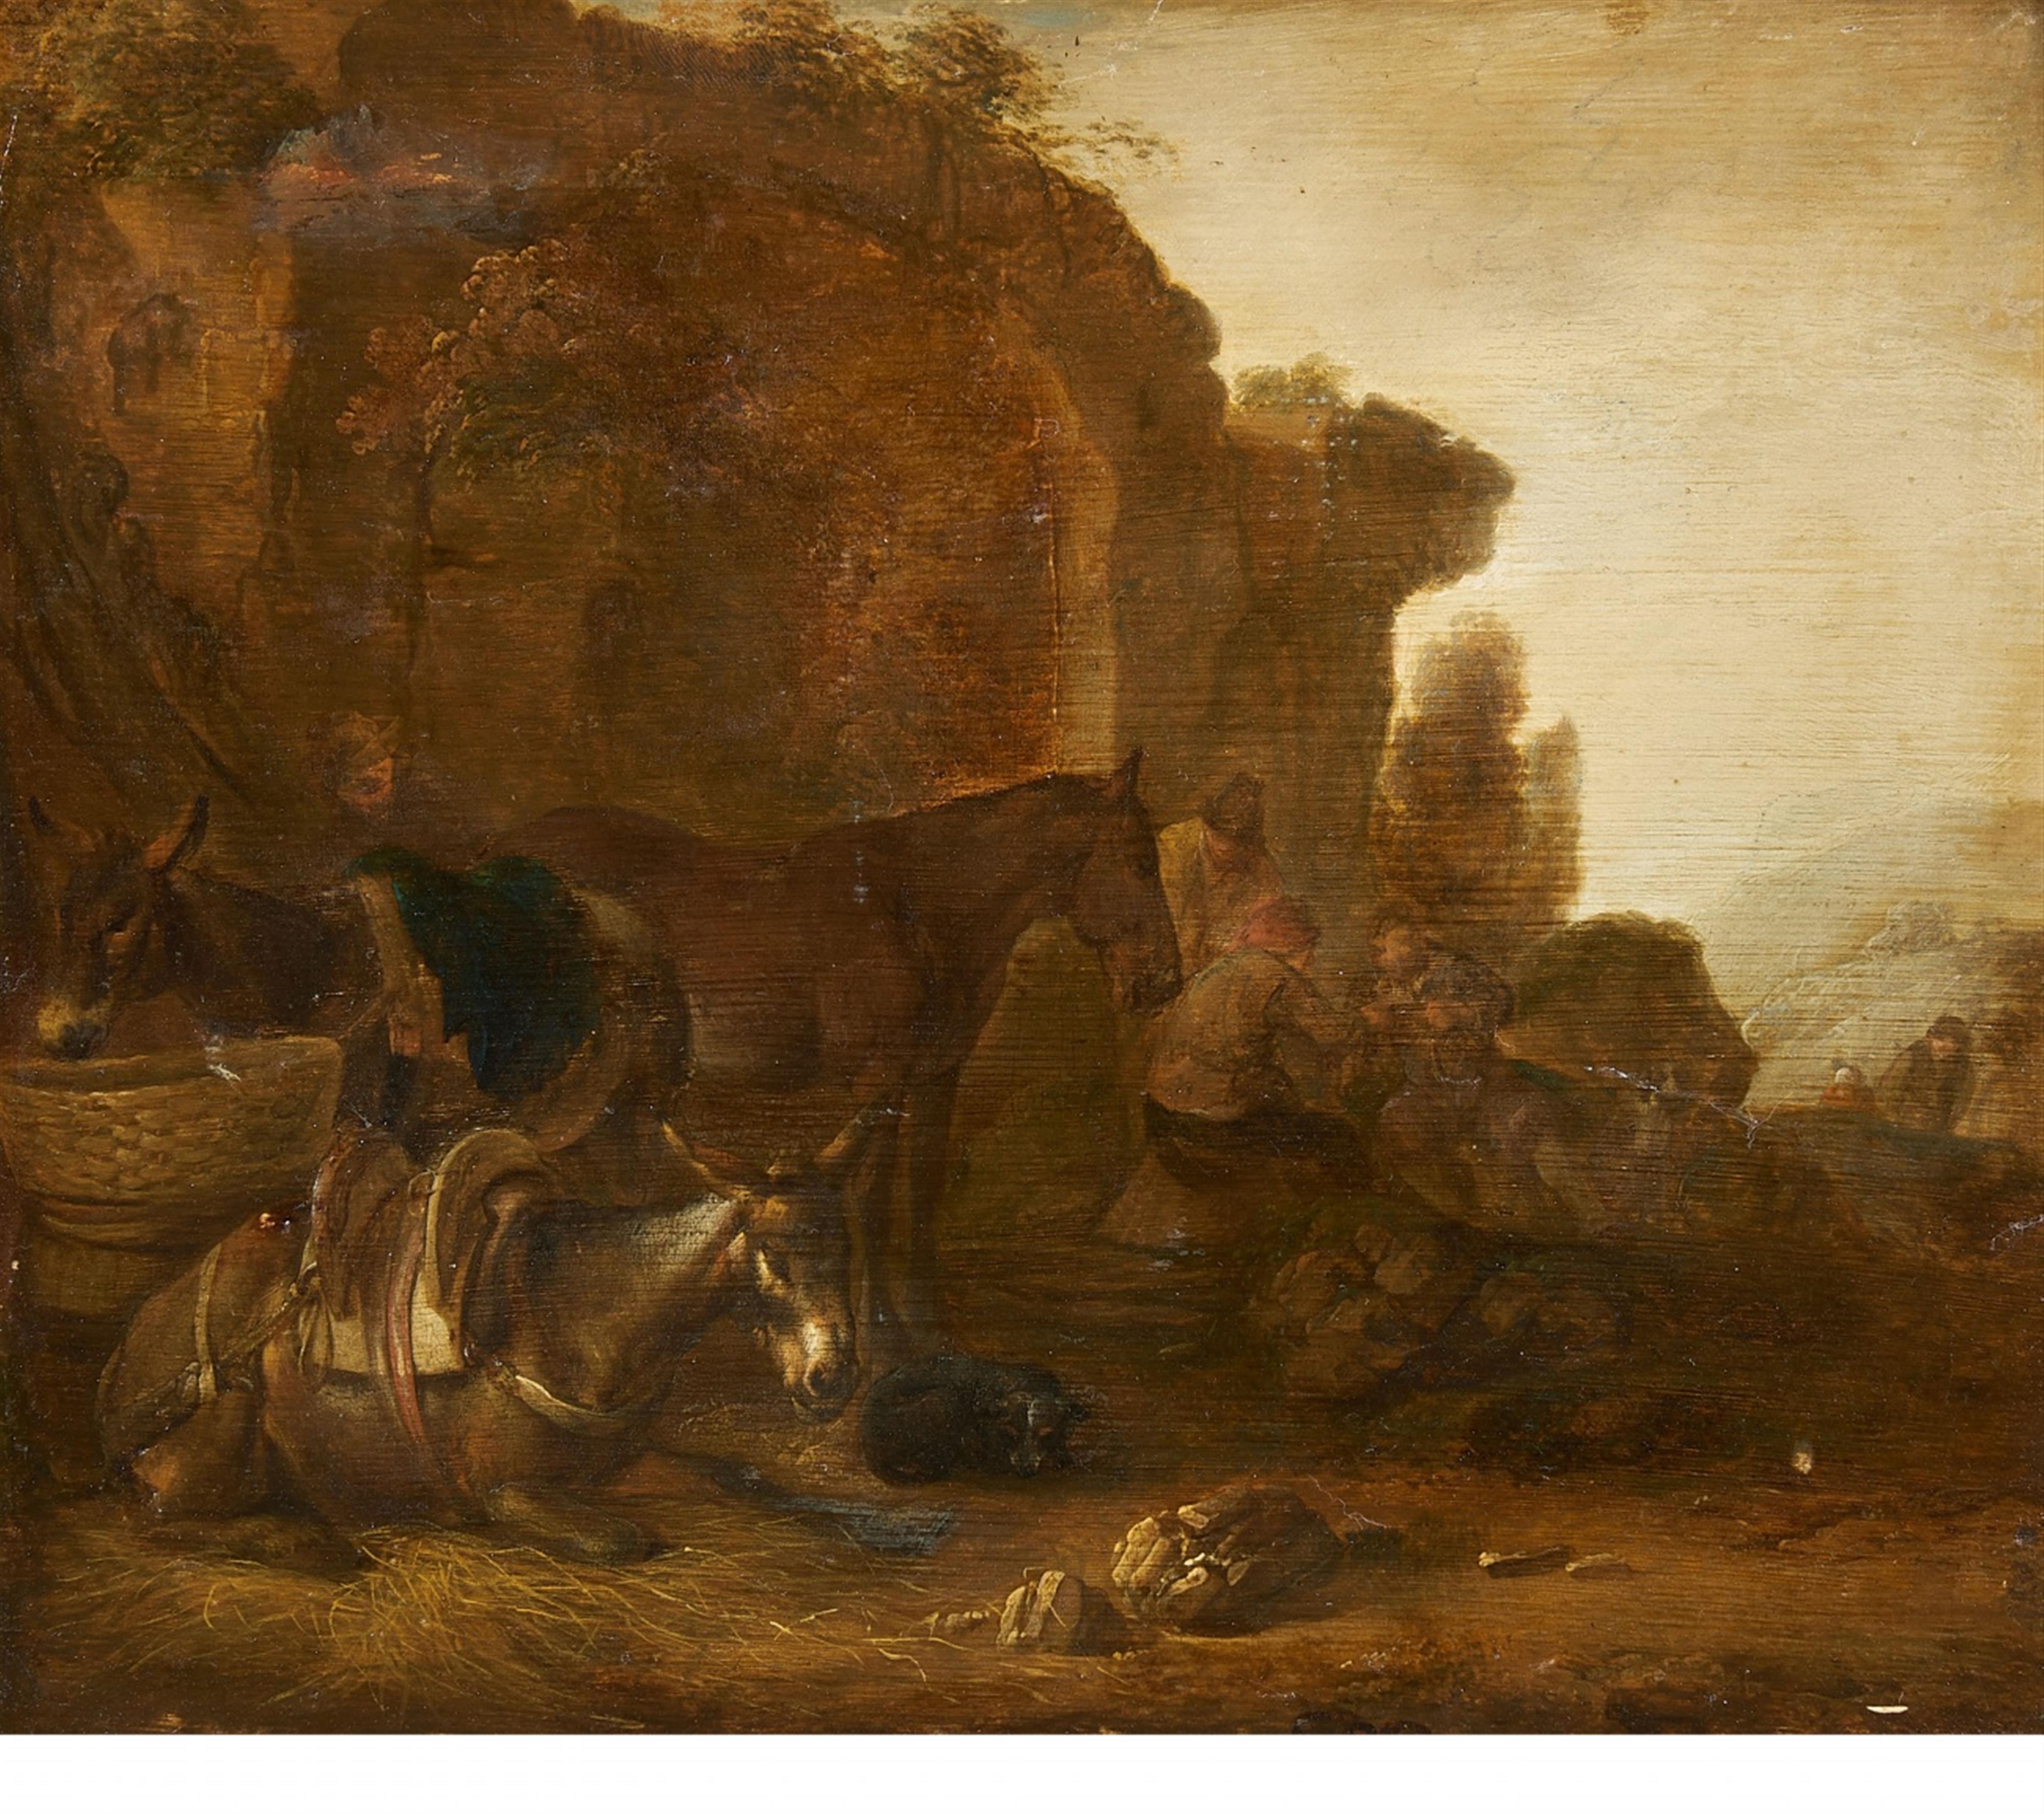 Netherlandish School 17th century - Landscape with Donkeys, a Horse and Travellers before Ancient Ruins - image-1